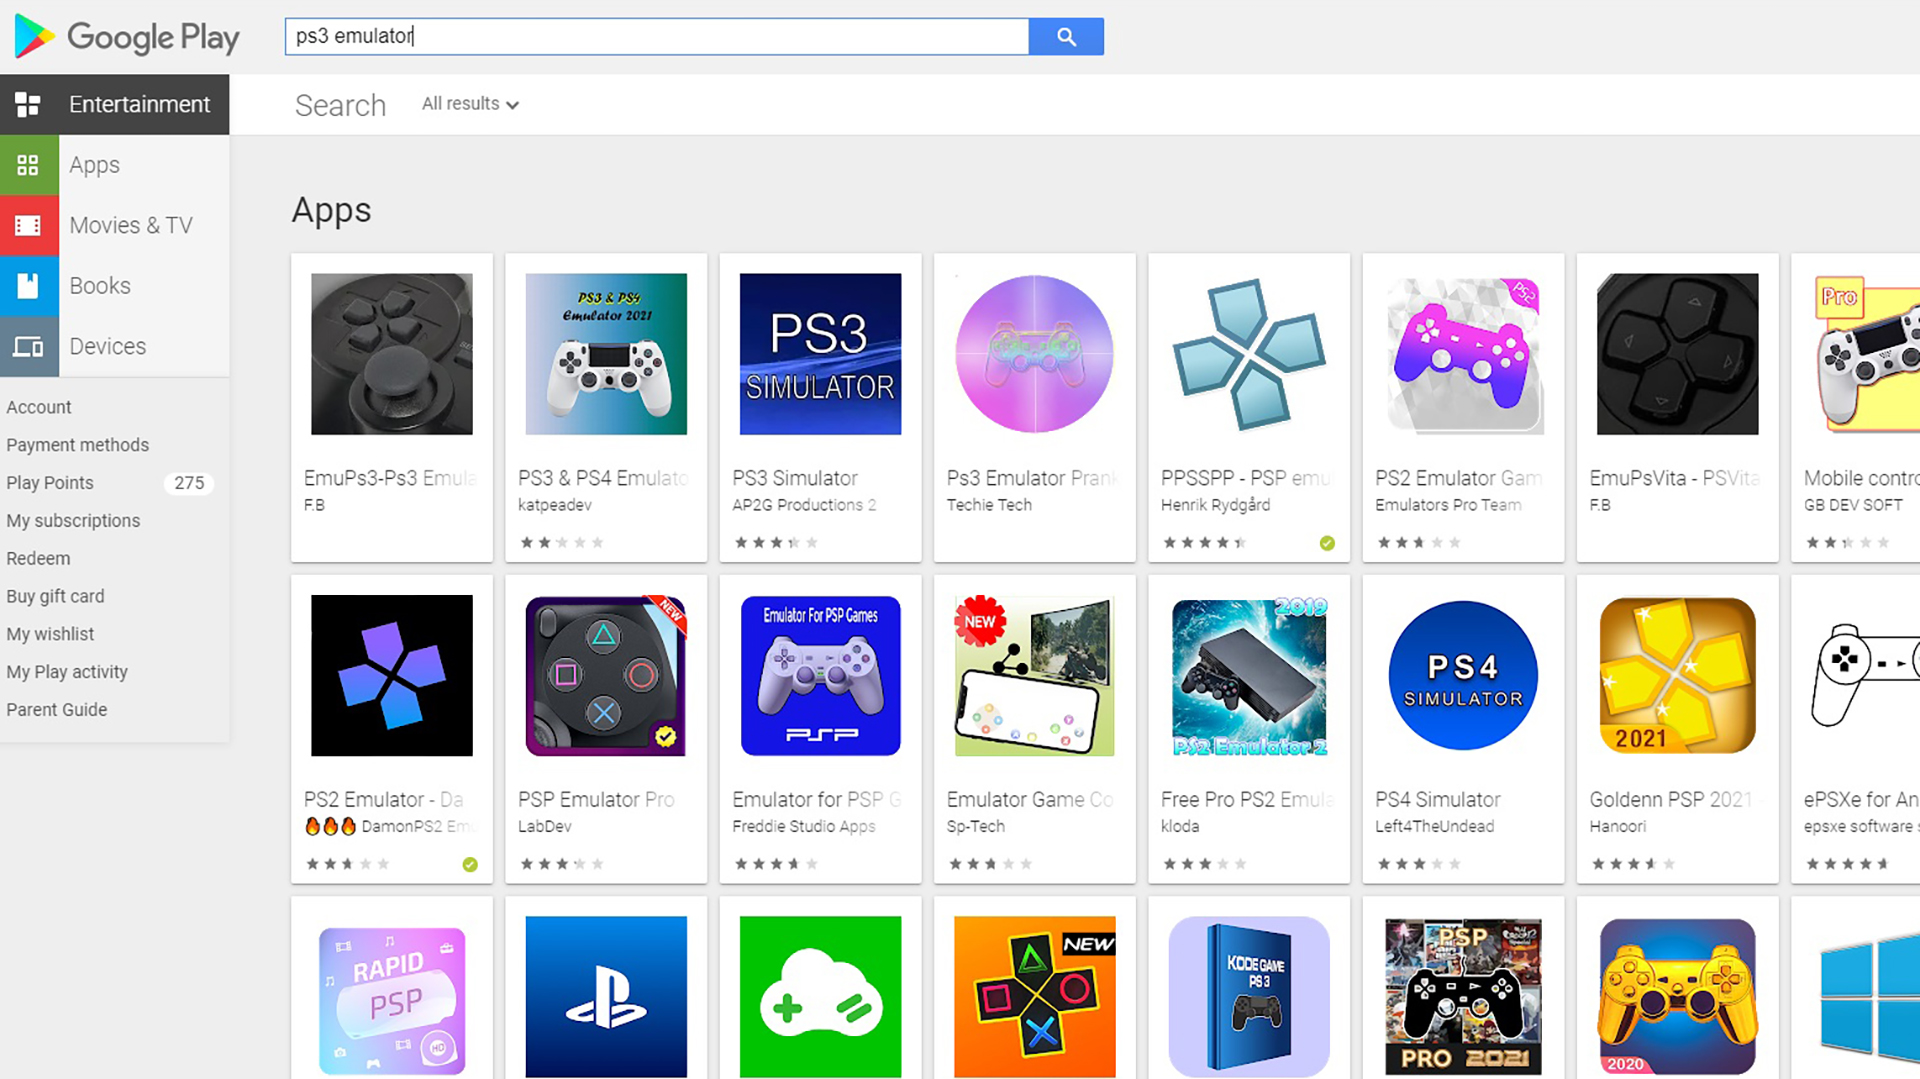 te binden Zwart Snor There isn't a real PS4/PS3 emulator for Android - Android Authority